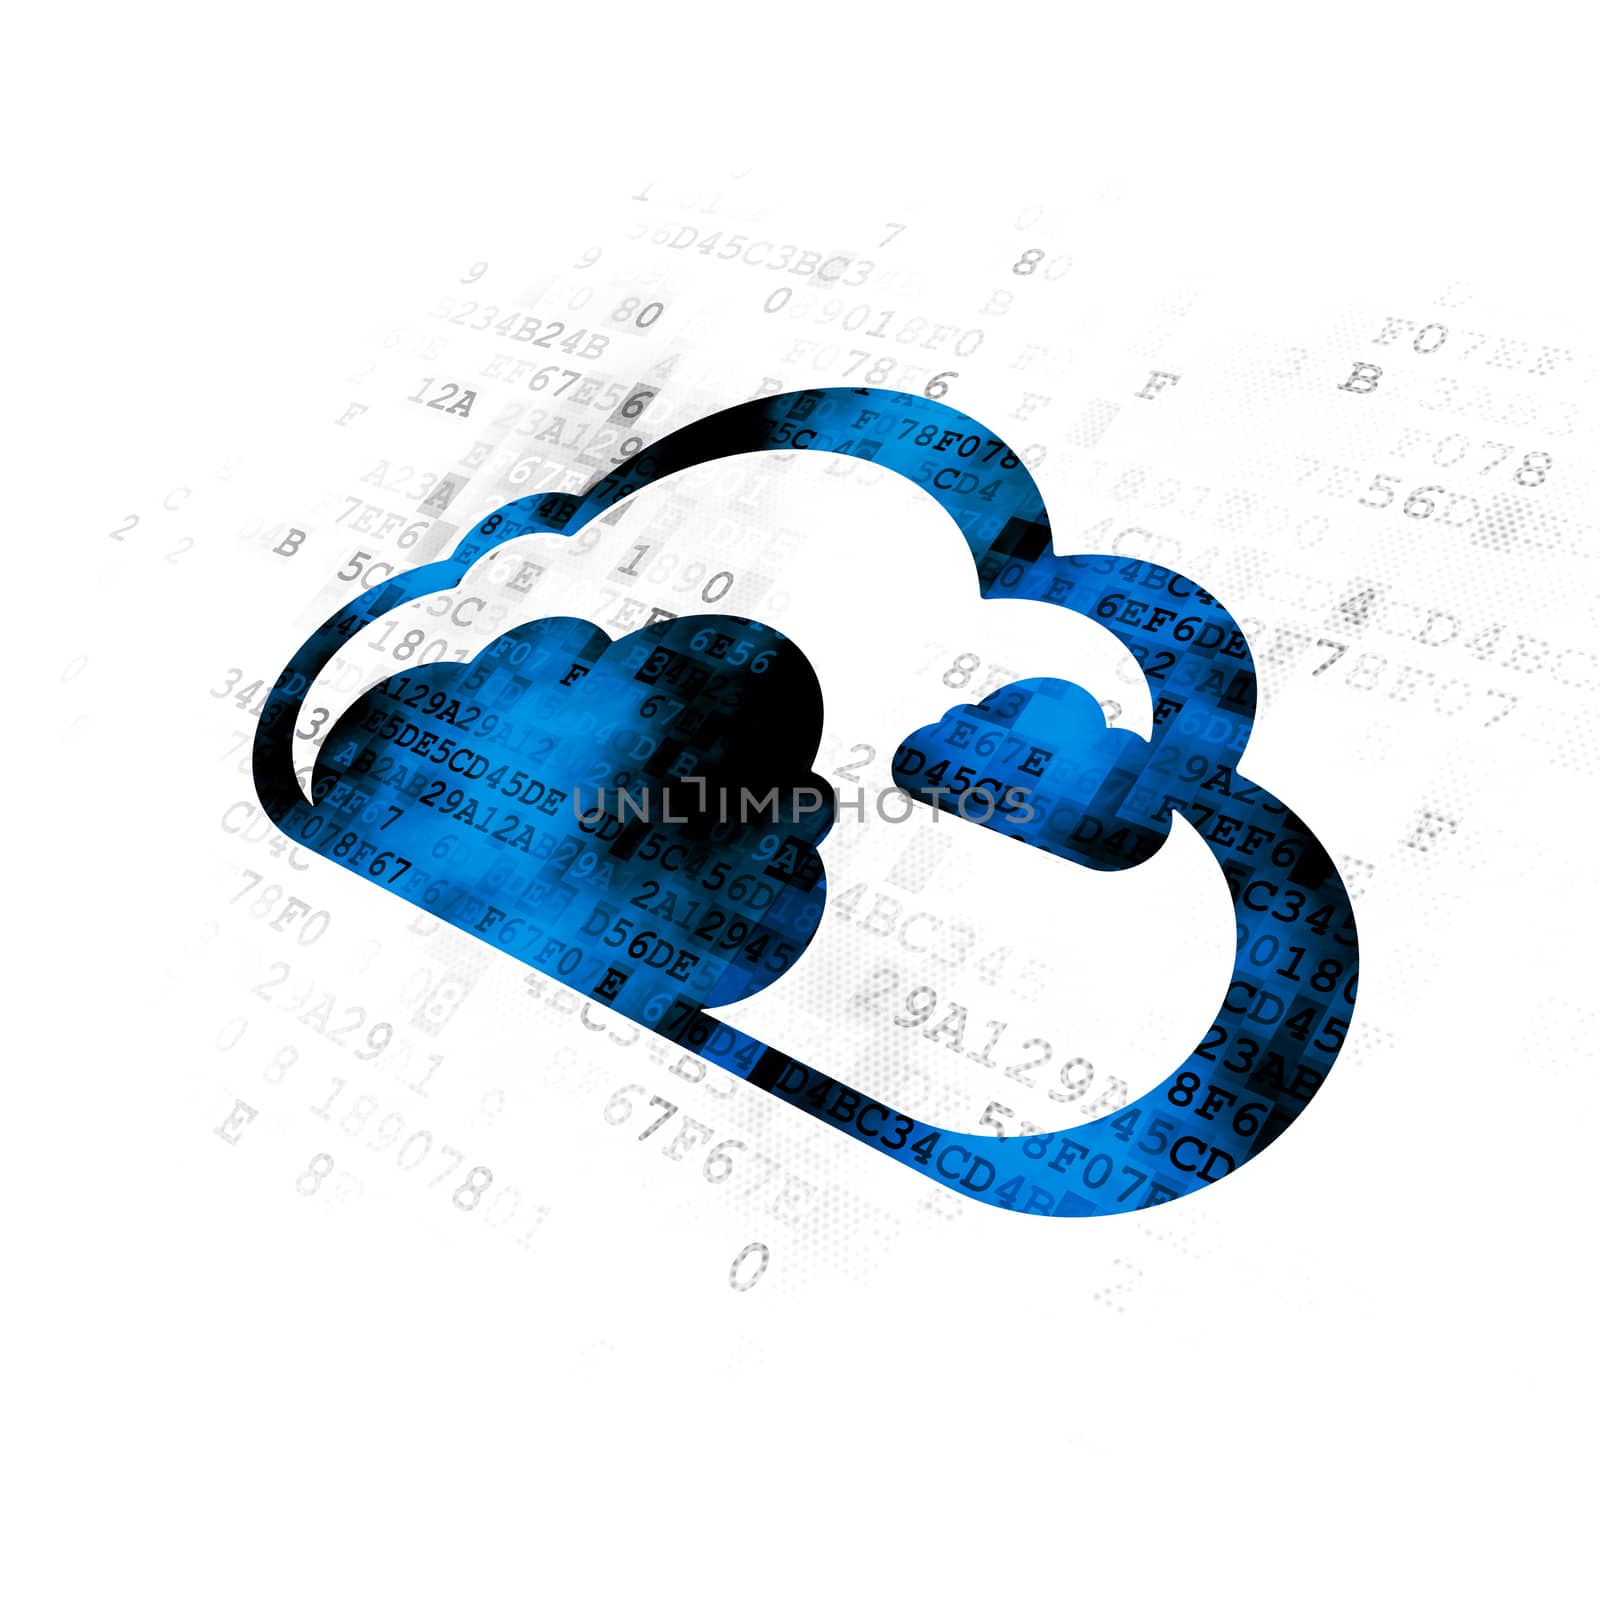 Cloud networking concept: Cloud on Digital background by maxkabakov